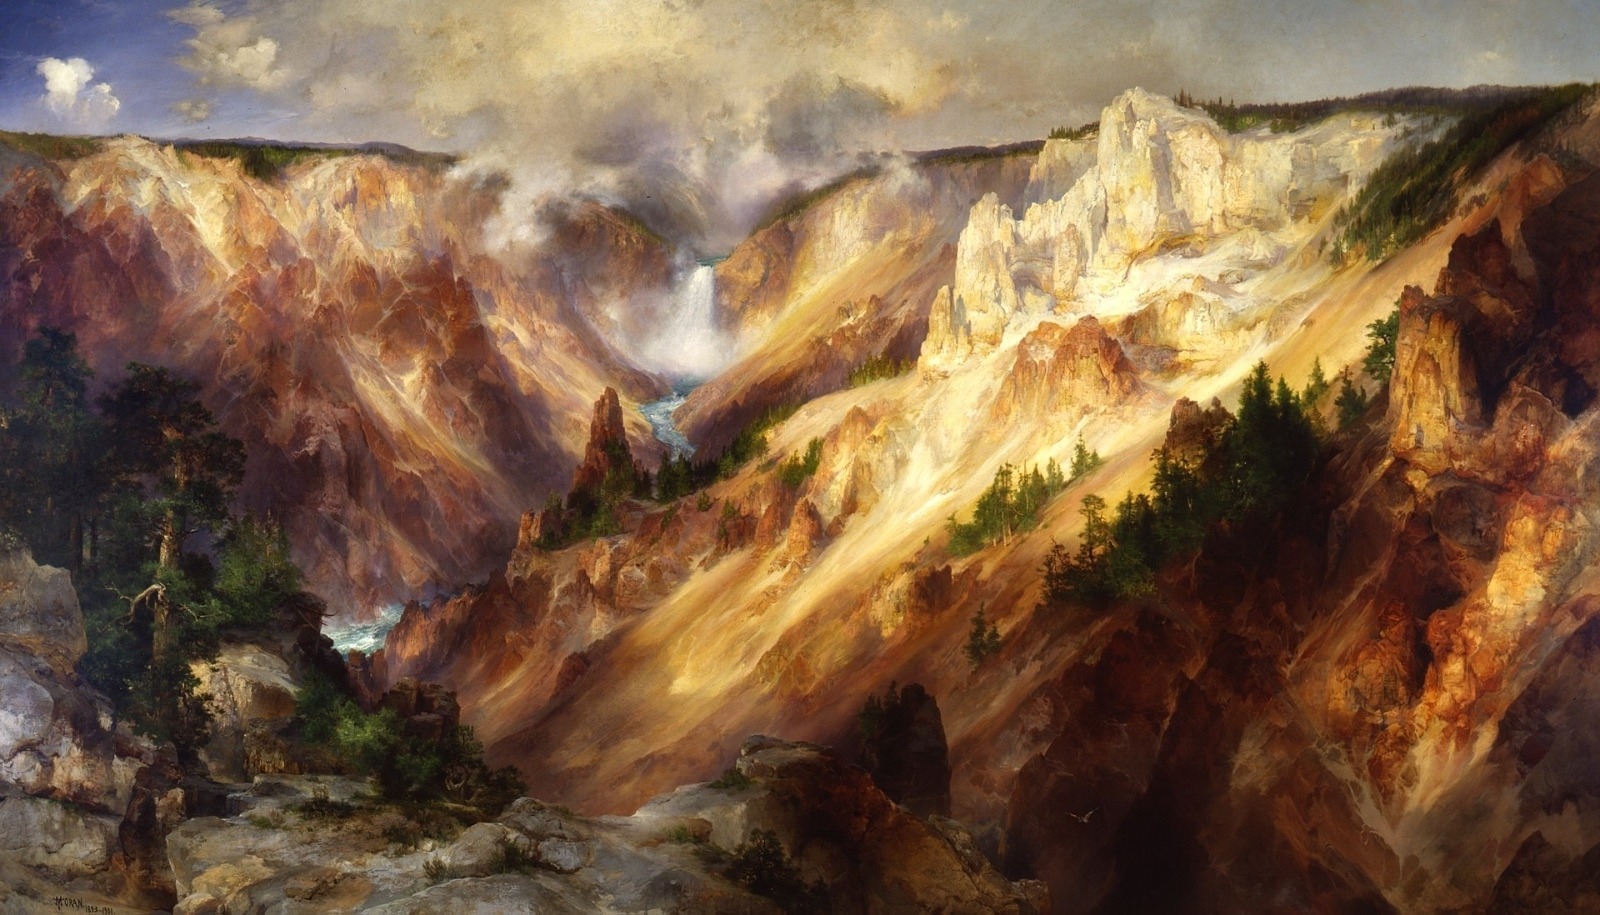 &quot;Grand Canon of the Yellowstone&quot; by Thomas Moran. This is a reinterpretation of the most famous and consequential land-protection painting in the world, for the original made members of Congress swoon and ignited the global national park movement that started with the creation of Yellowstone on March 1 in 1872.  The original painting can be viewed, as part of your own heritage, at the Smithsonian's American Art Museum in Washington, D.C. 